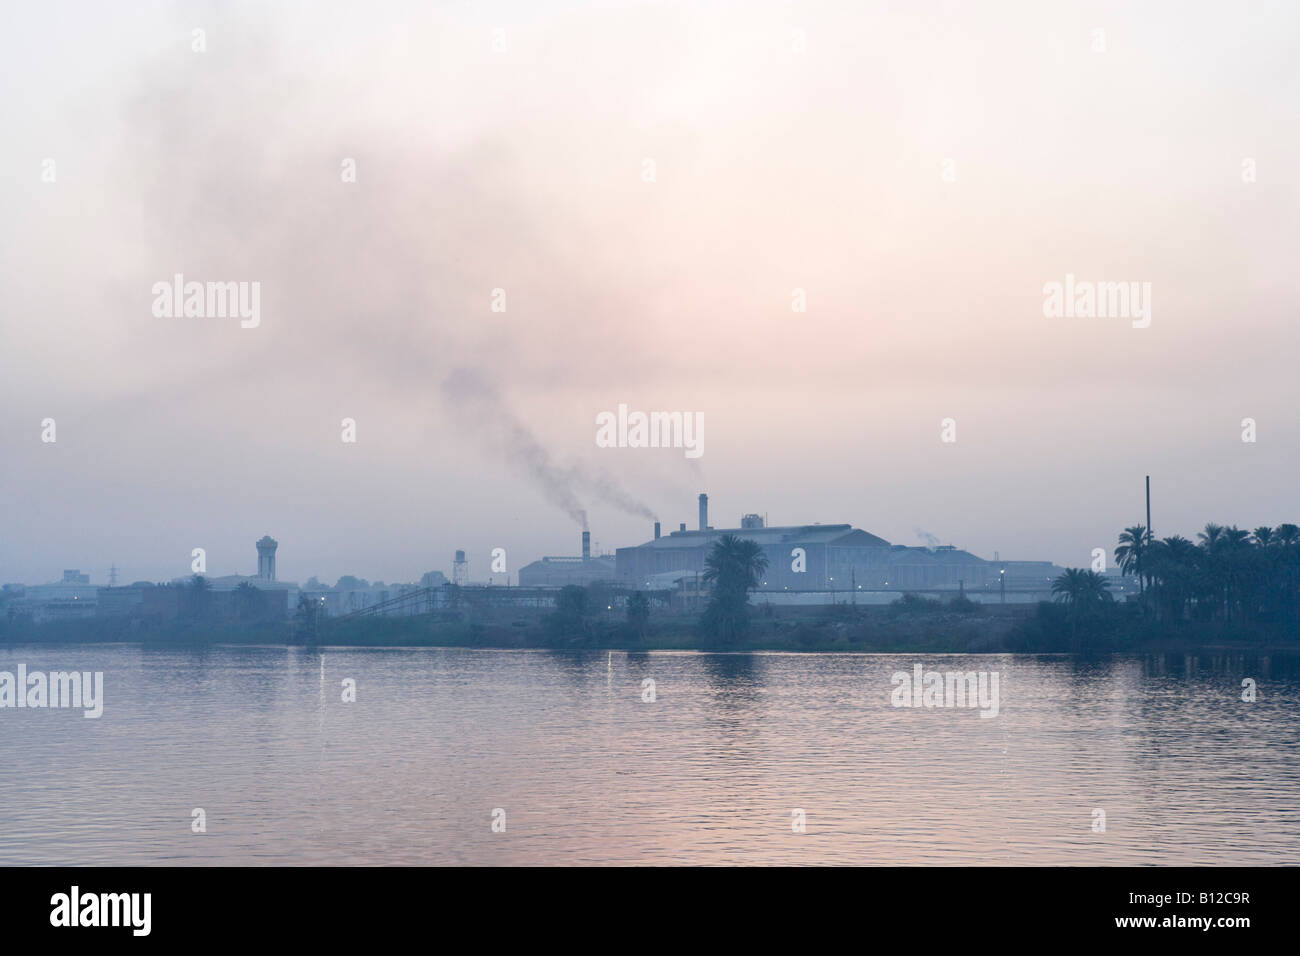 Industrial Pollution from factory on the banks of the River Nile at dawn from deck of Nile Cruiser, Luxor, Nile Valley, Egypt Stock Photo